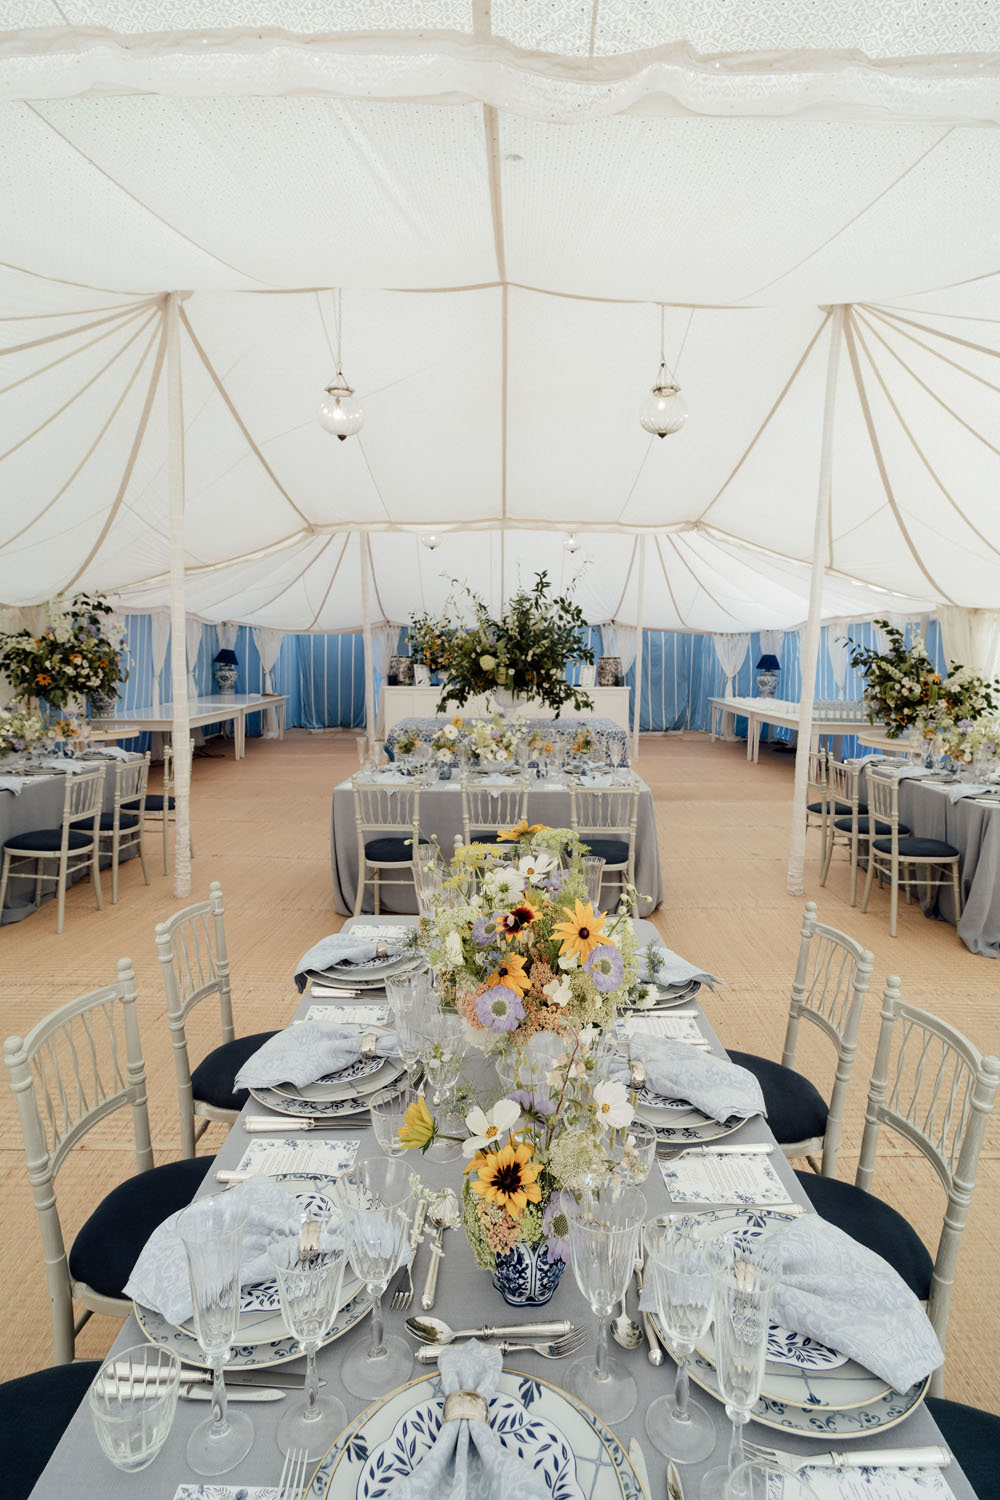 Heckfield Place, Luxury Event, Pocketful of dreams, Event Styling, 60th Birthday, Tablescape, Sunday Brunch Party, Matt Porteous, Kitten Grayson, Skye Gyngell, White and blue party